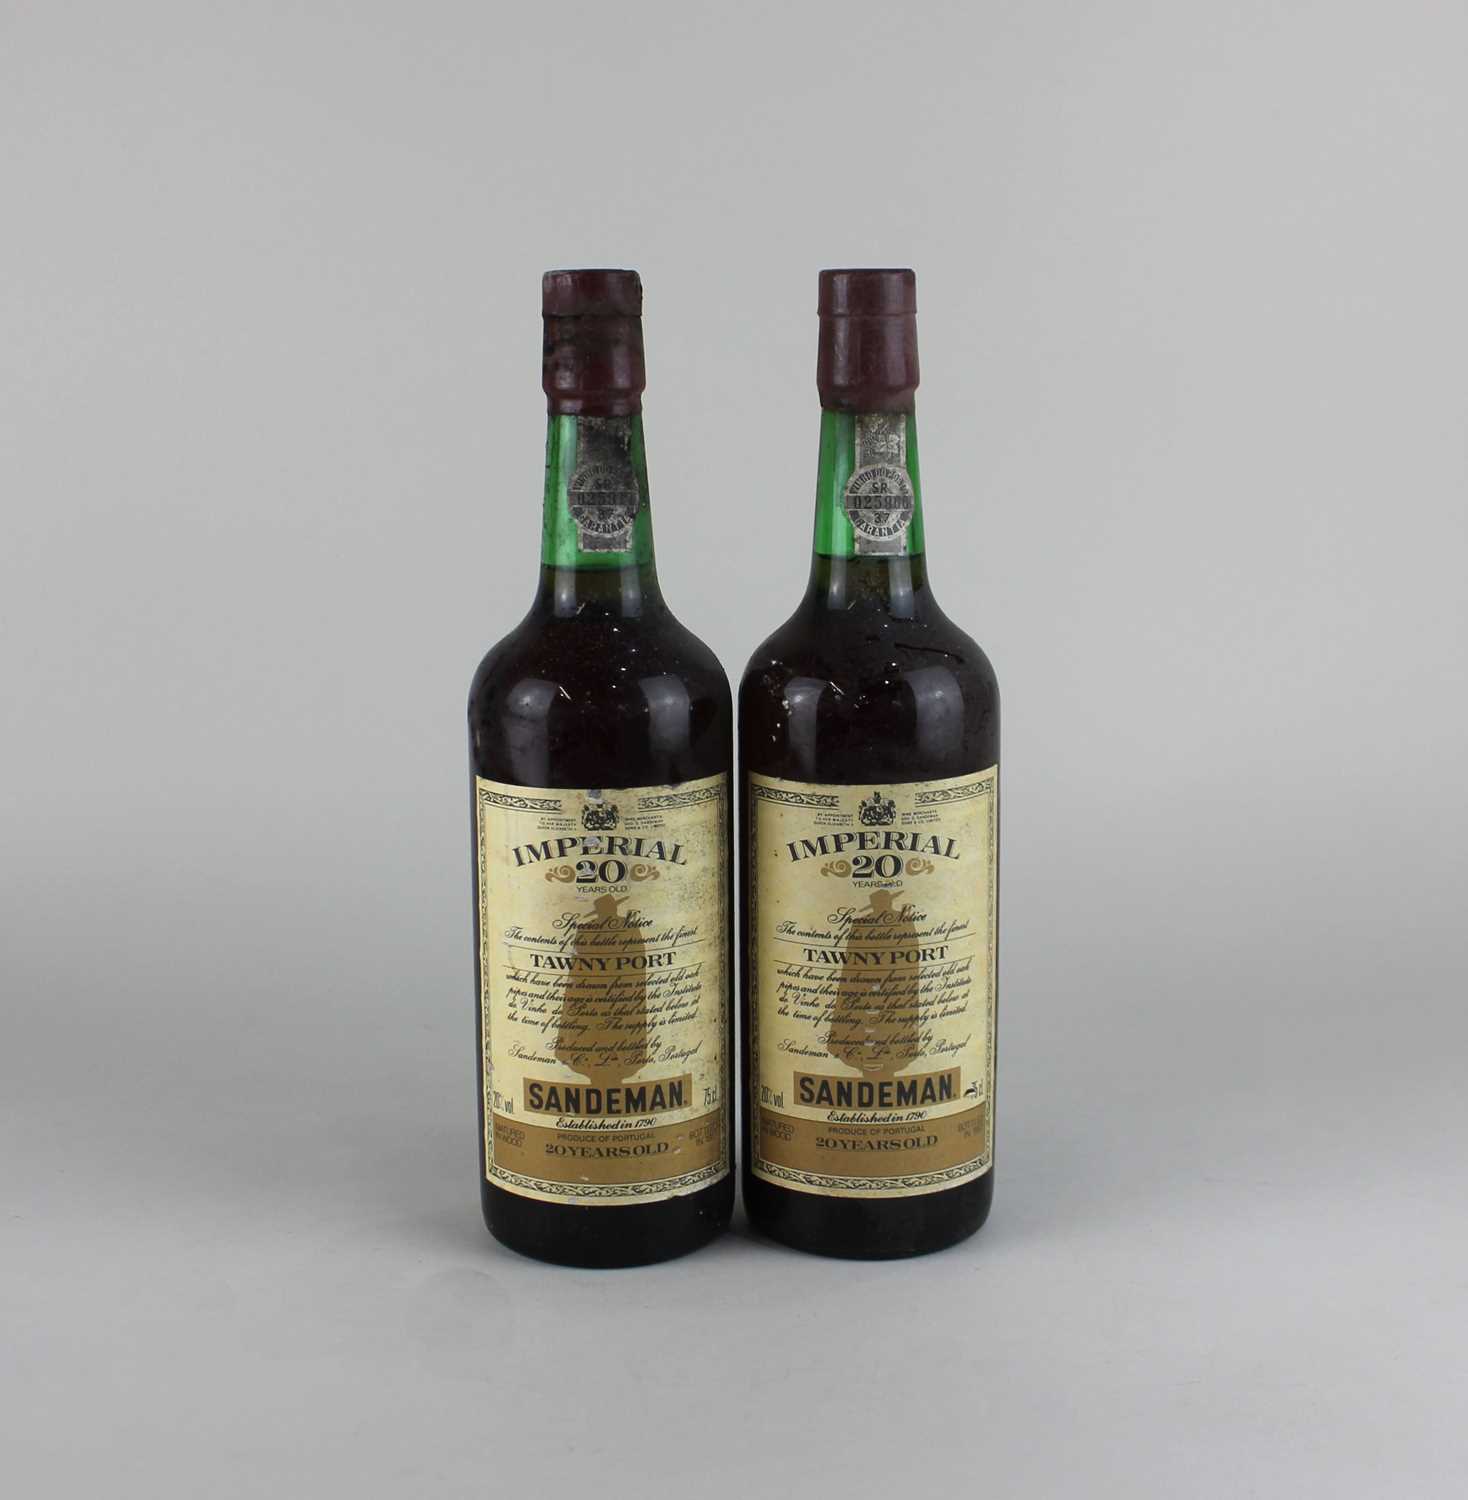 Two bottles of Sandeman Imperial 20 years old Tawny Port 75cl *sold as seen